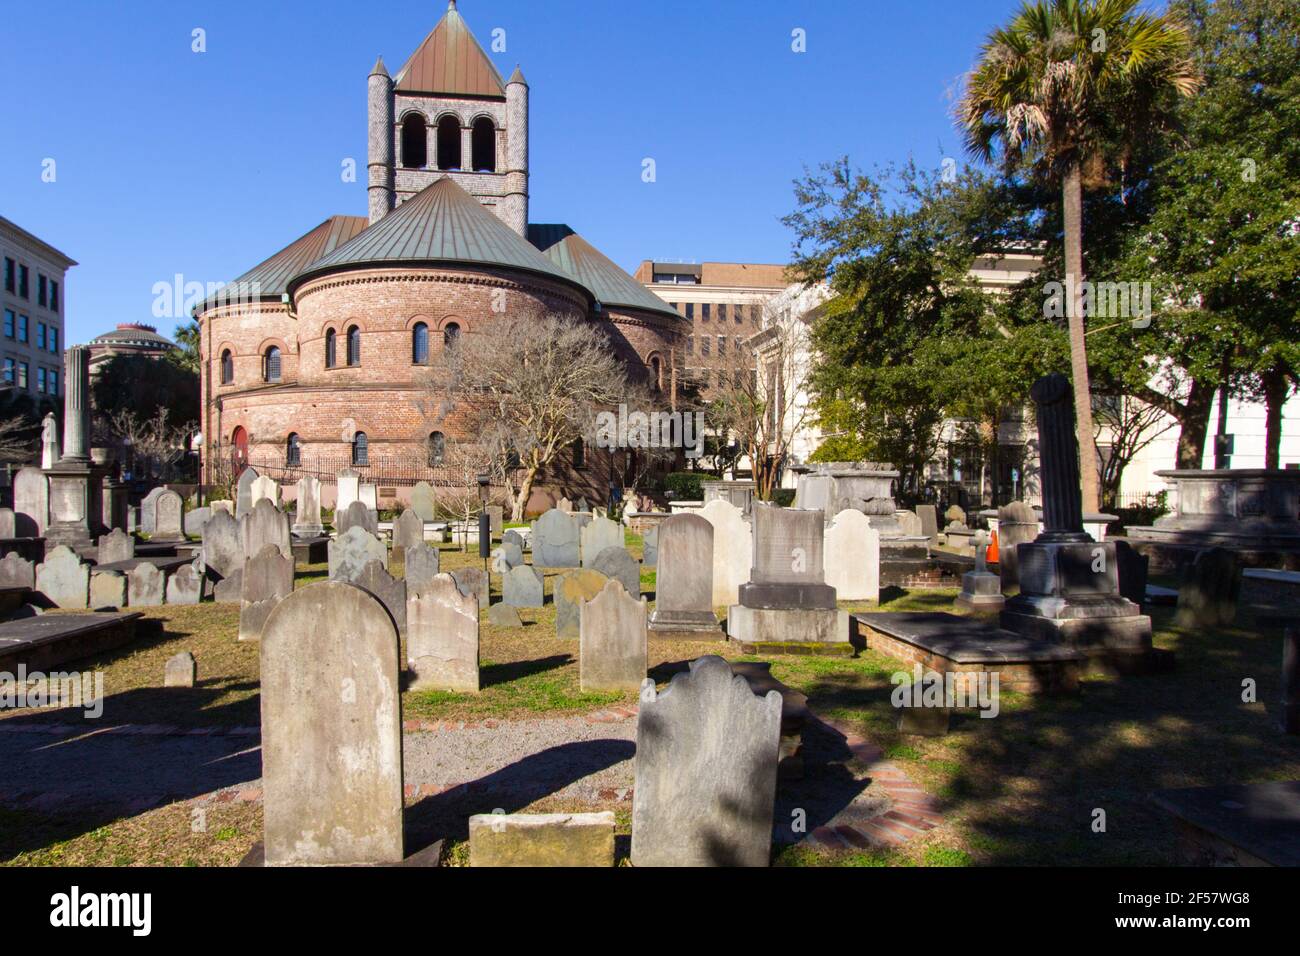 Charleston, South Carolina, USA - February 23, 2021: Exterior of the Circular Congregational Church and graveyard. The cemetery has graves from 1700s Stock Photo